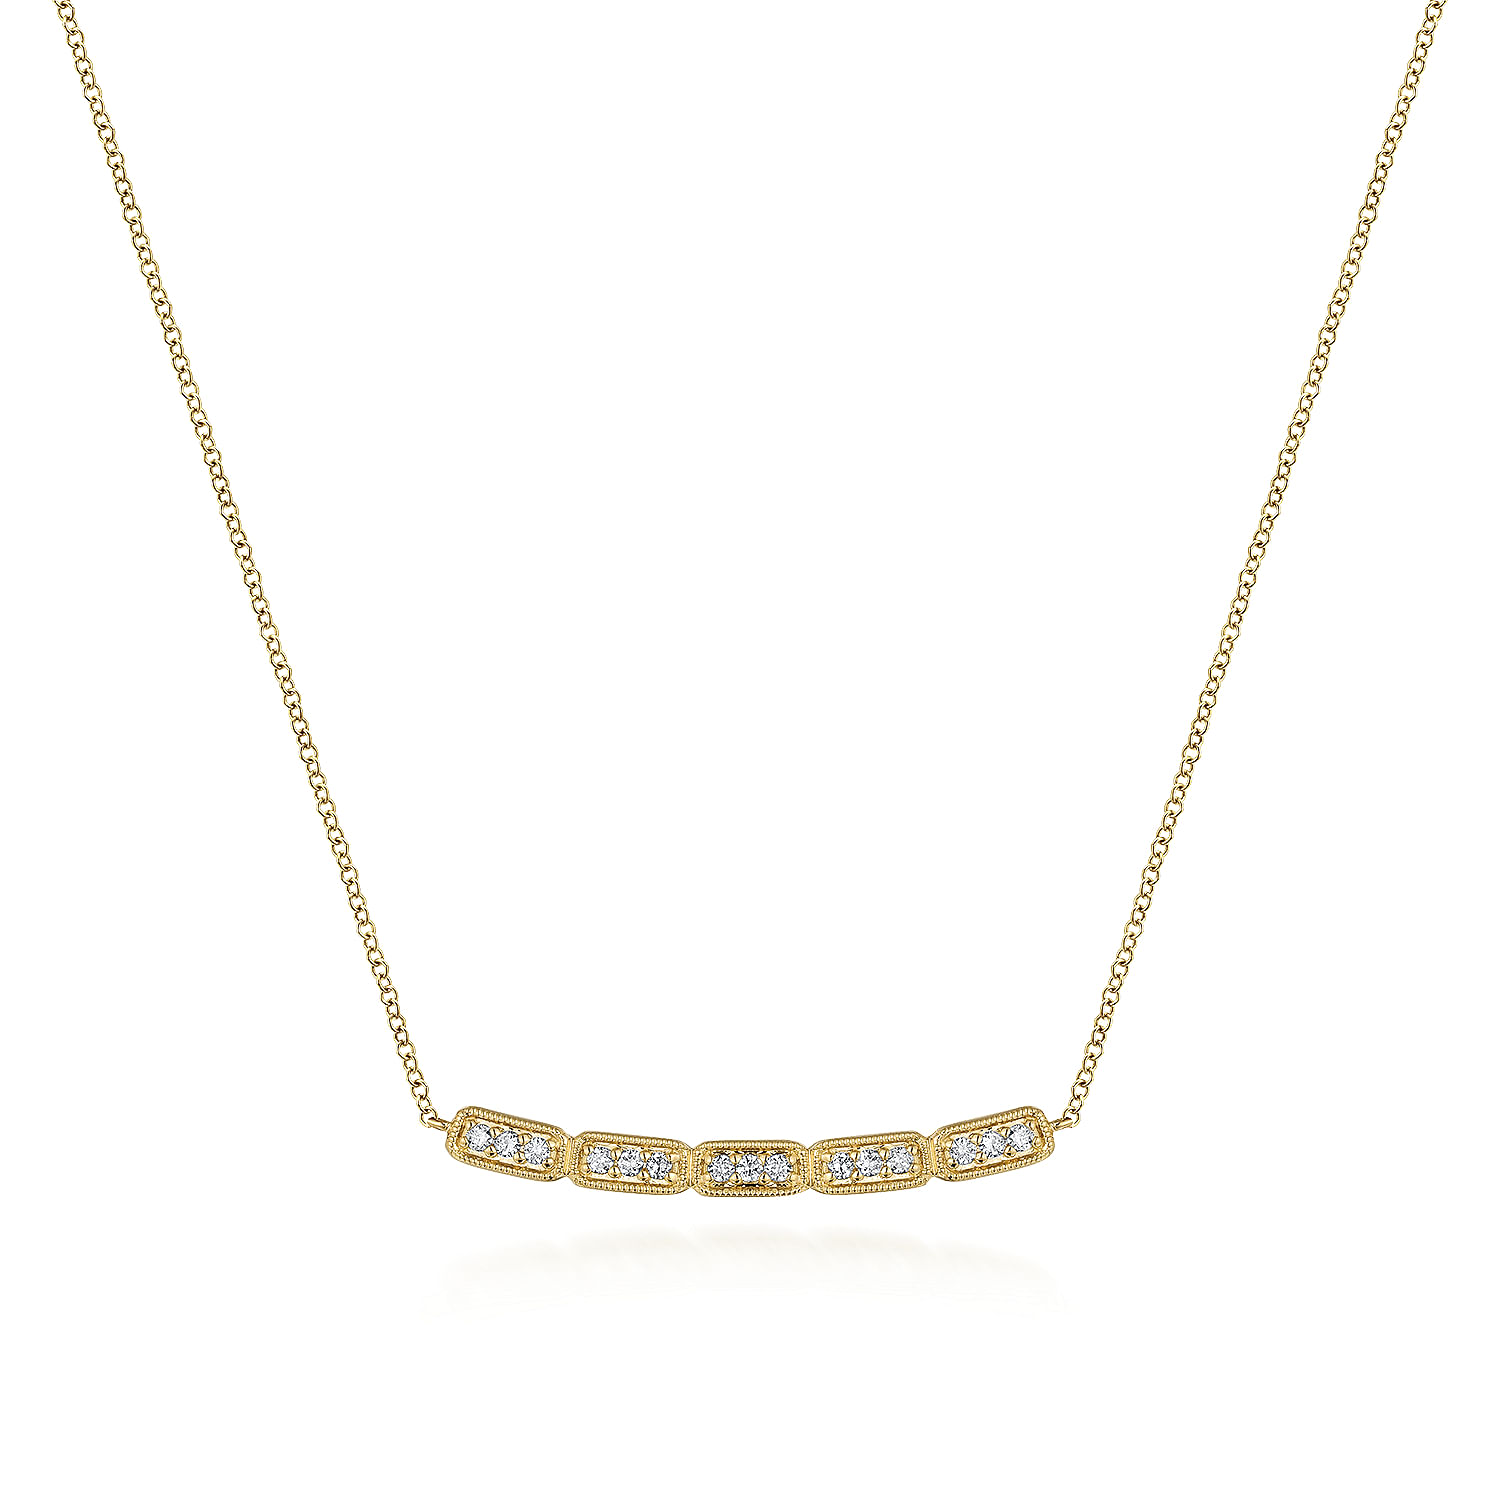 Gabriel - 14K Yellow Gold Curved Rectangular Station Bar Necklace with Diamonds